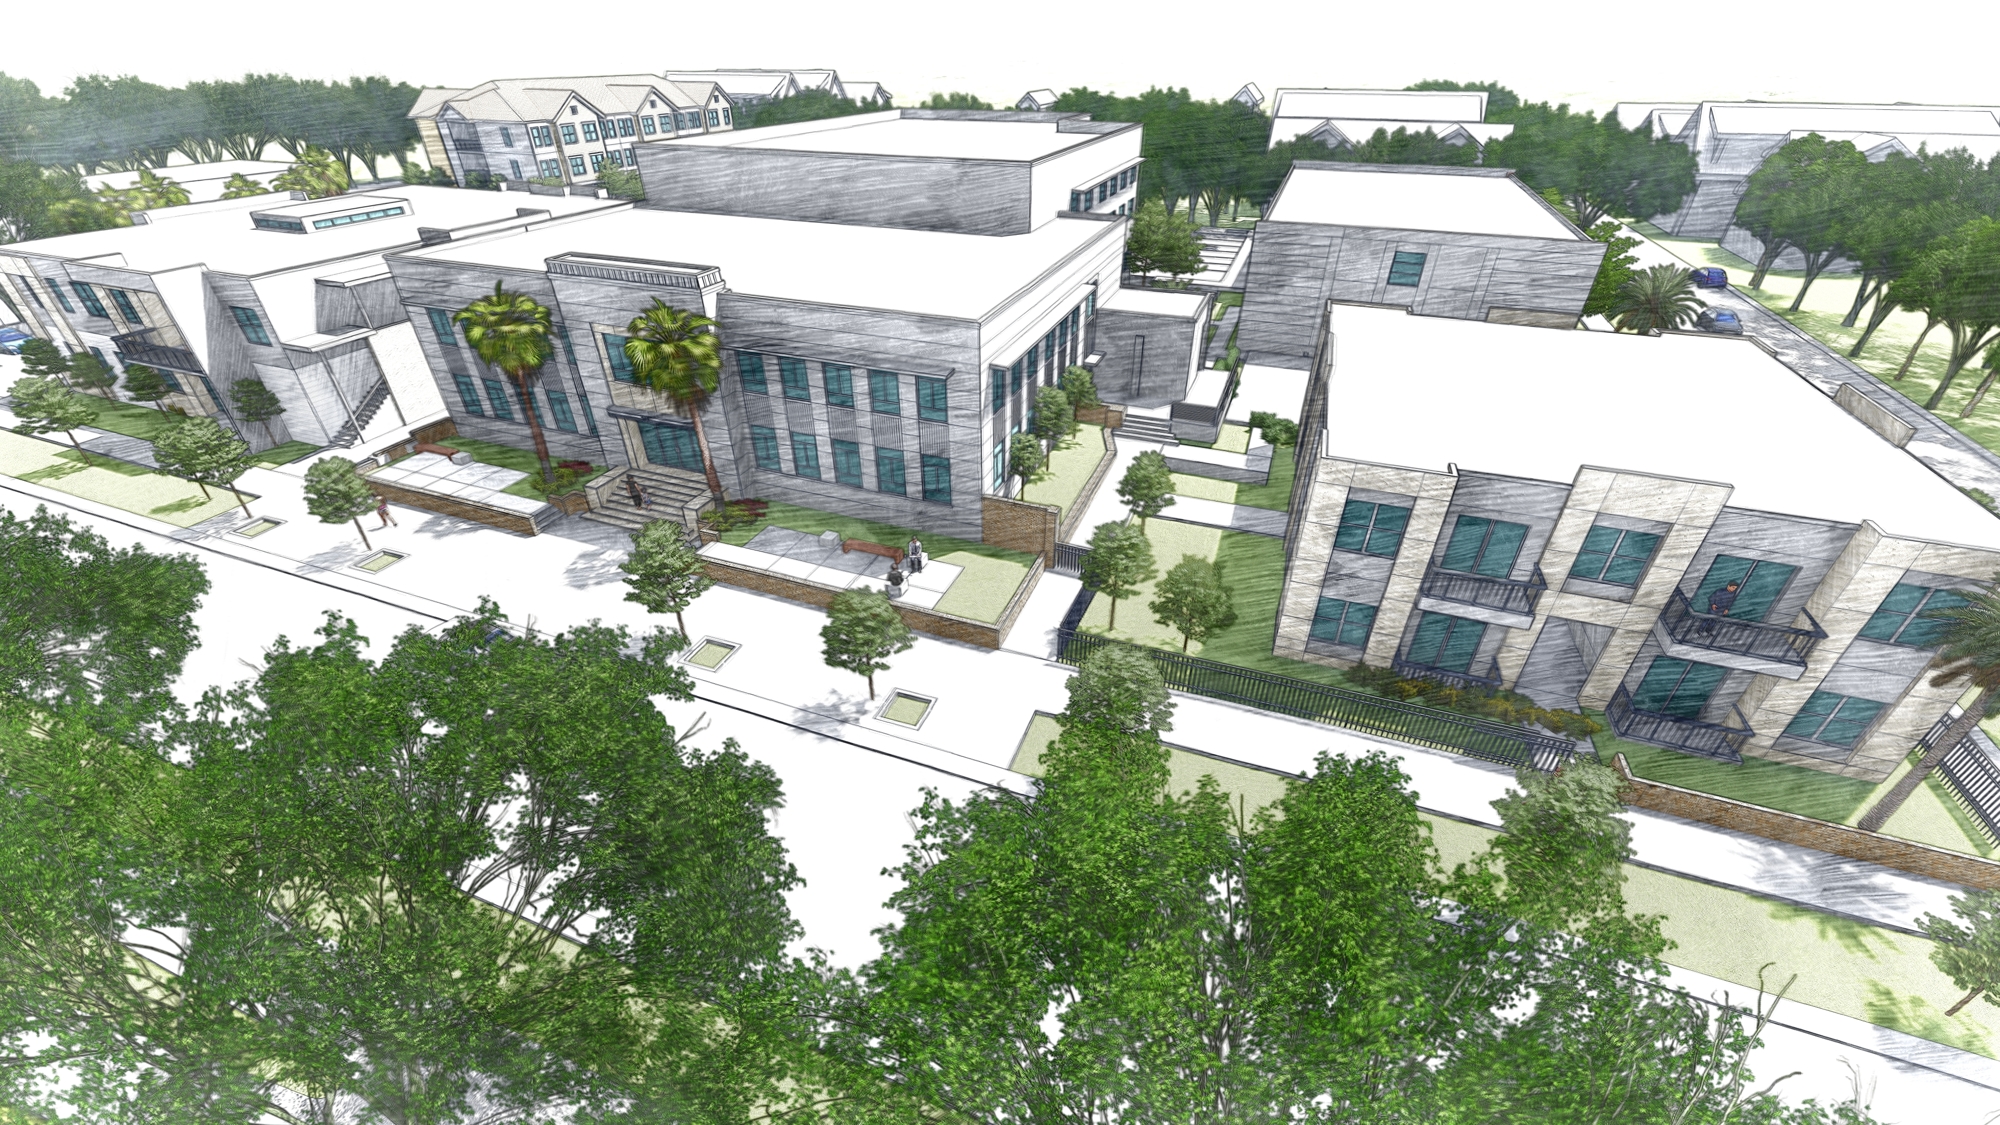 Conceptual renderings of the redeveloped former Jacksonville Jewish Center in Springfield. GNP Development Partners LLC proposes 78 market-rate apartments and 8,000 square feet of commercial space.